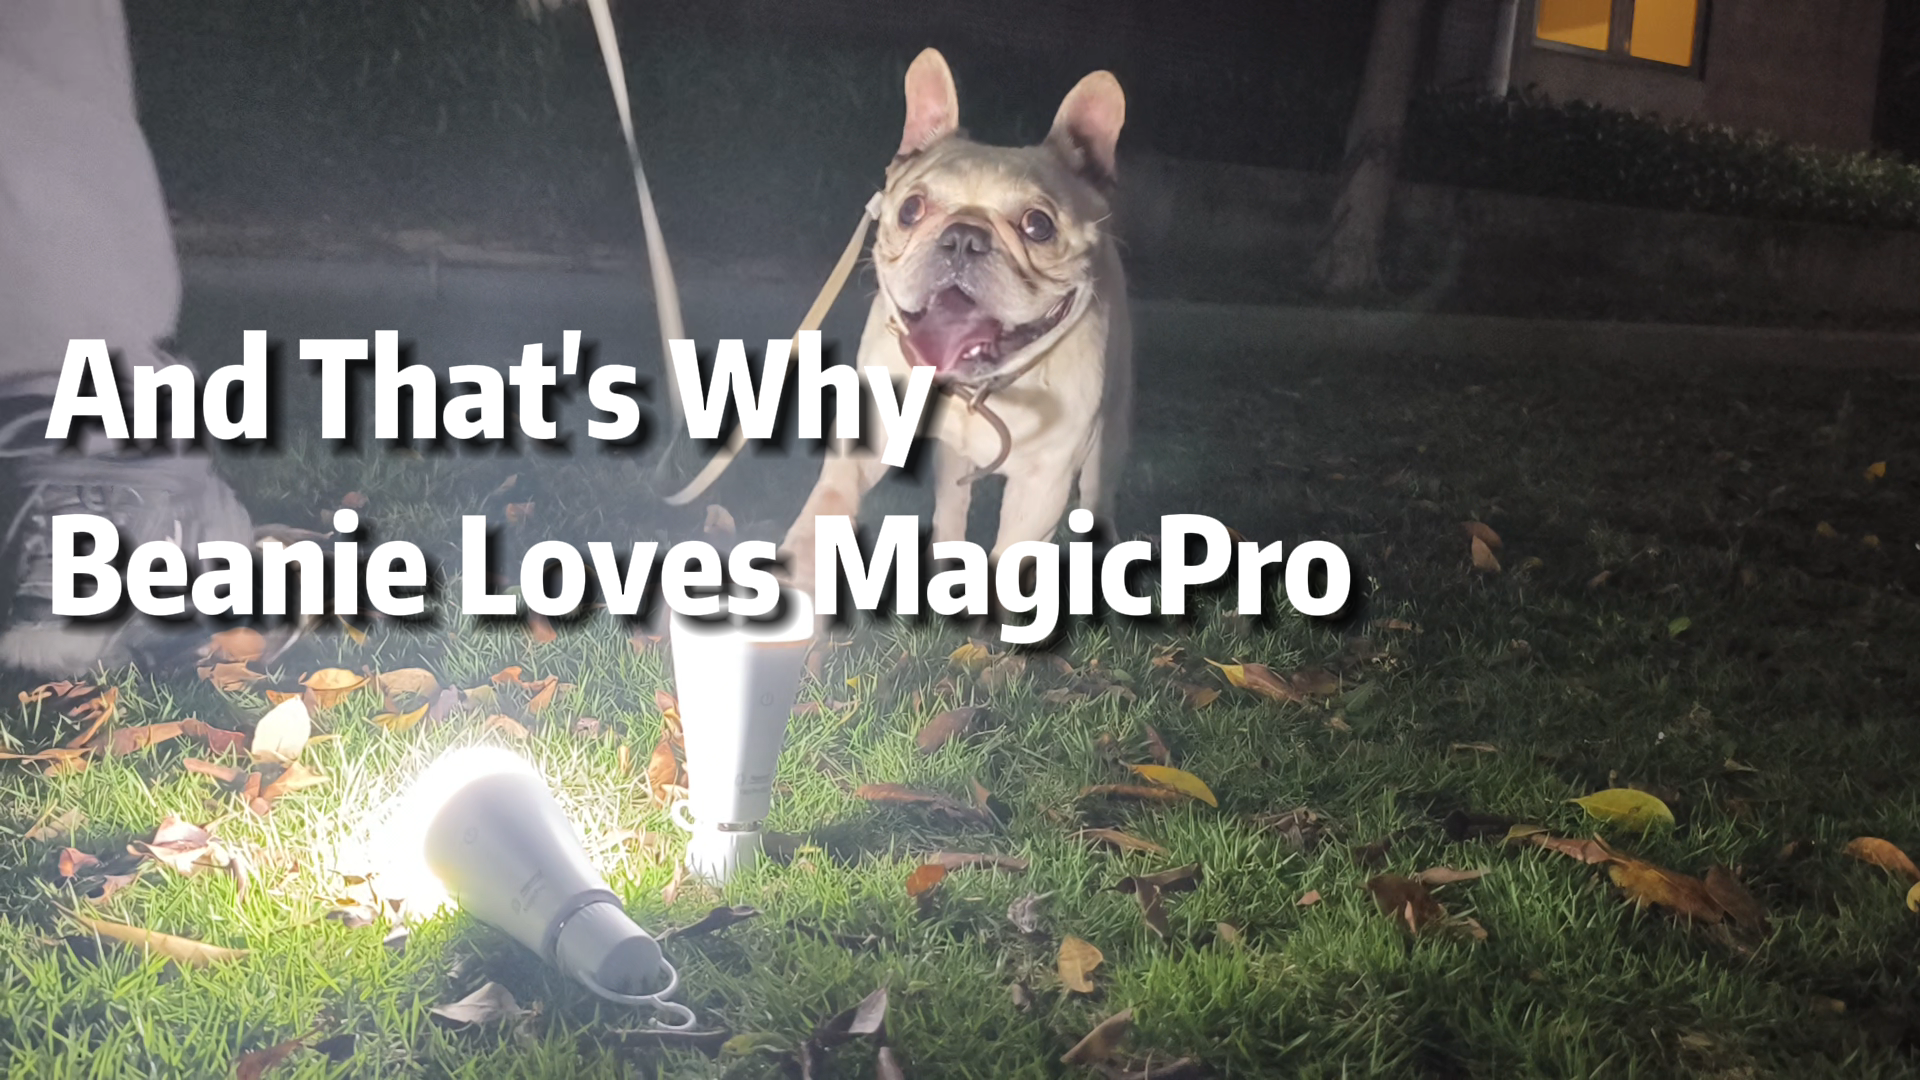 Load video: Neporal MagicPRO rechargeable light bulbs